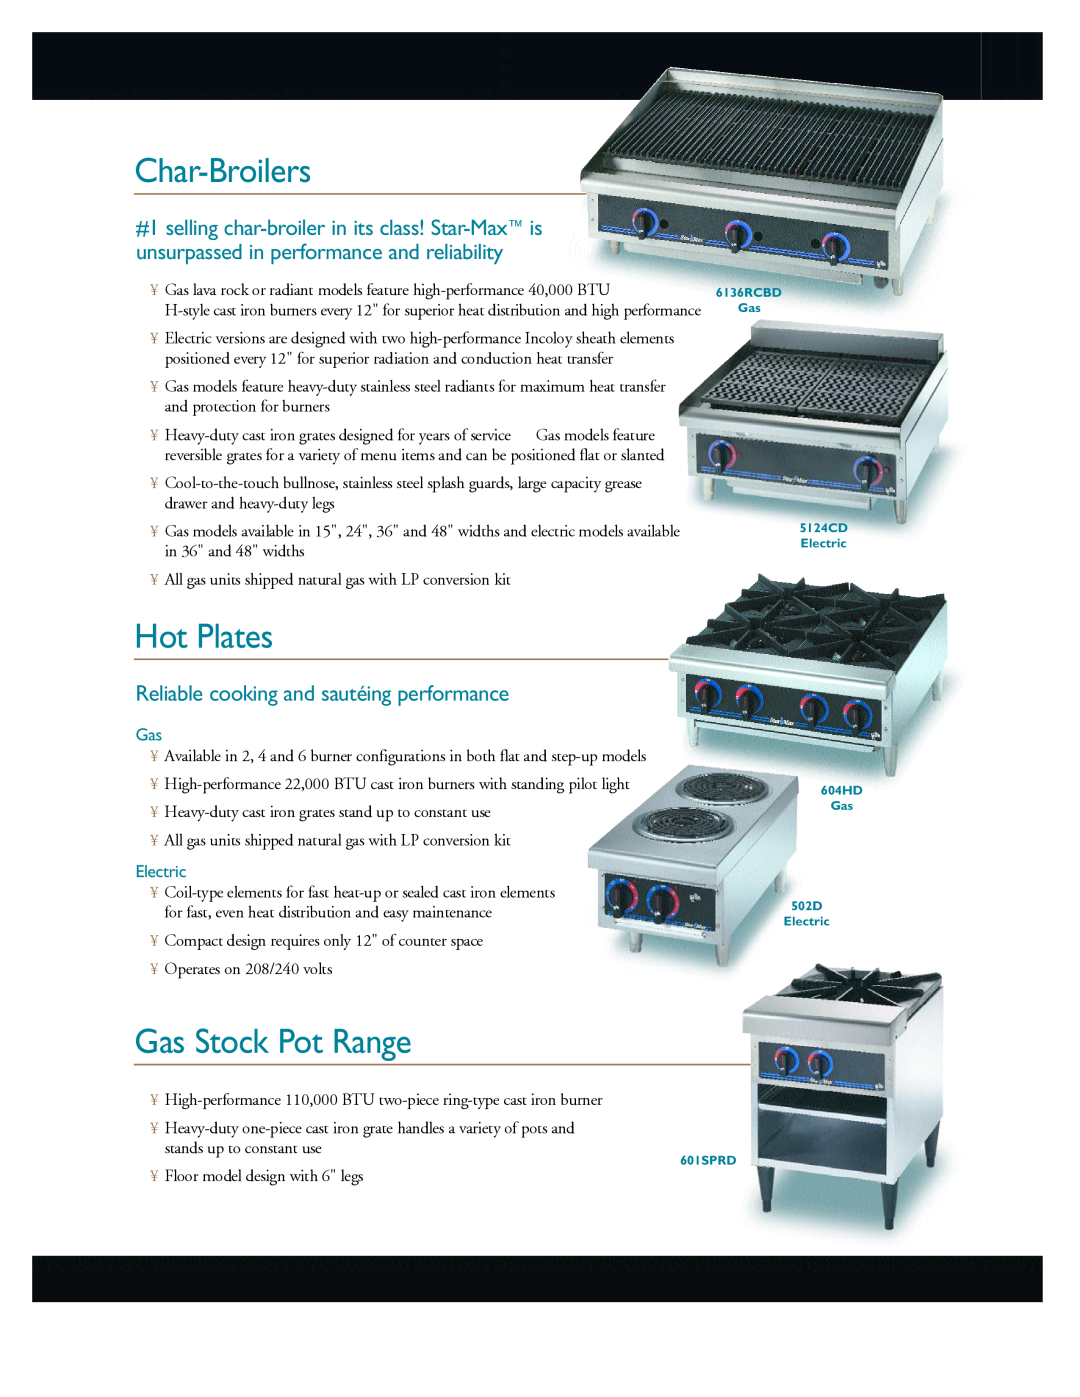 Star Manufacturing Countertop Cooking Equipment manual Char-Broilers, Hot Plates, Gas Stock Pot Range, Electric 